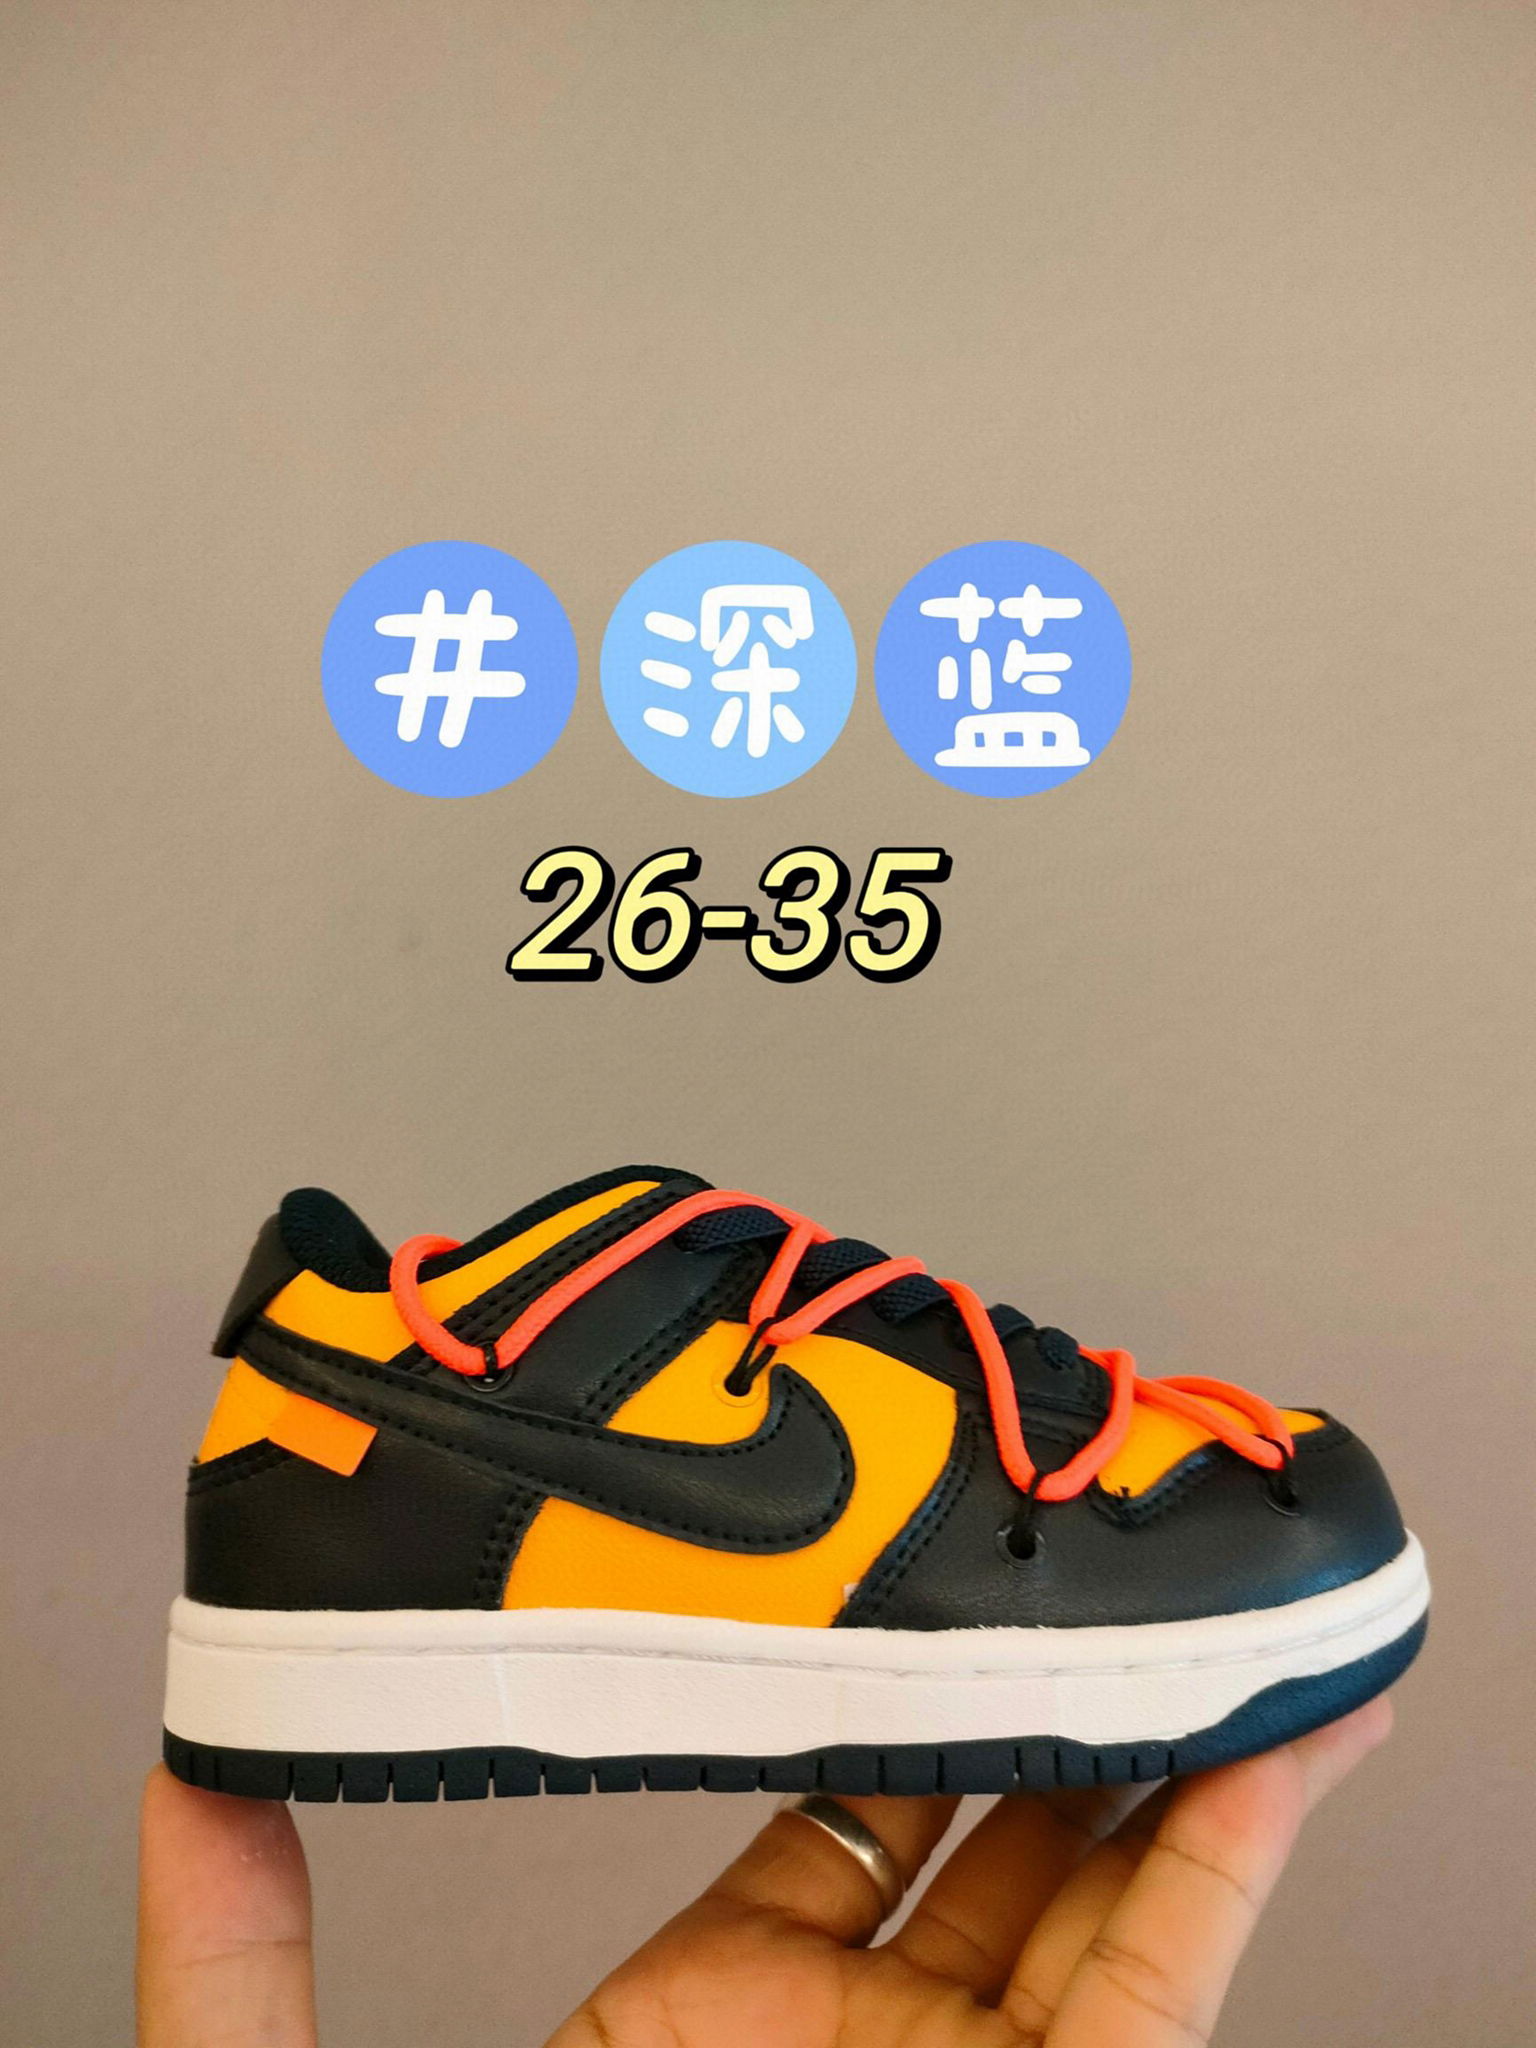 2022 SB DUNK KID SHOES WHOLEASLE SB Dunk Low enlists our Dunk Low 26-35 4